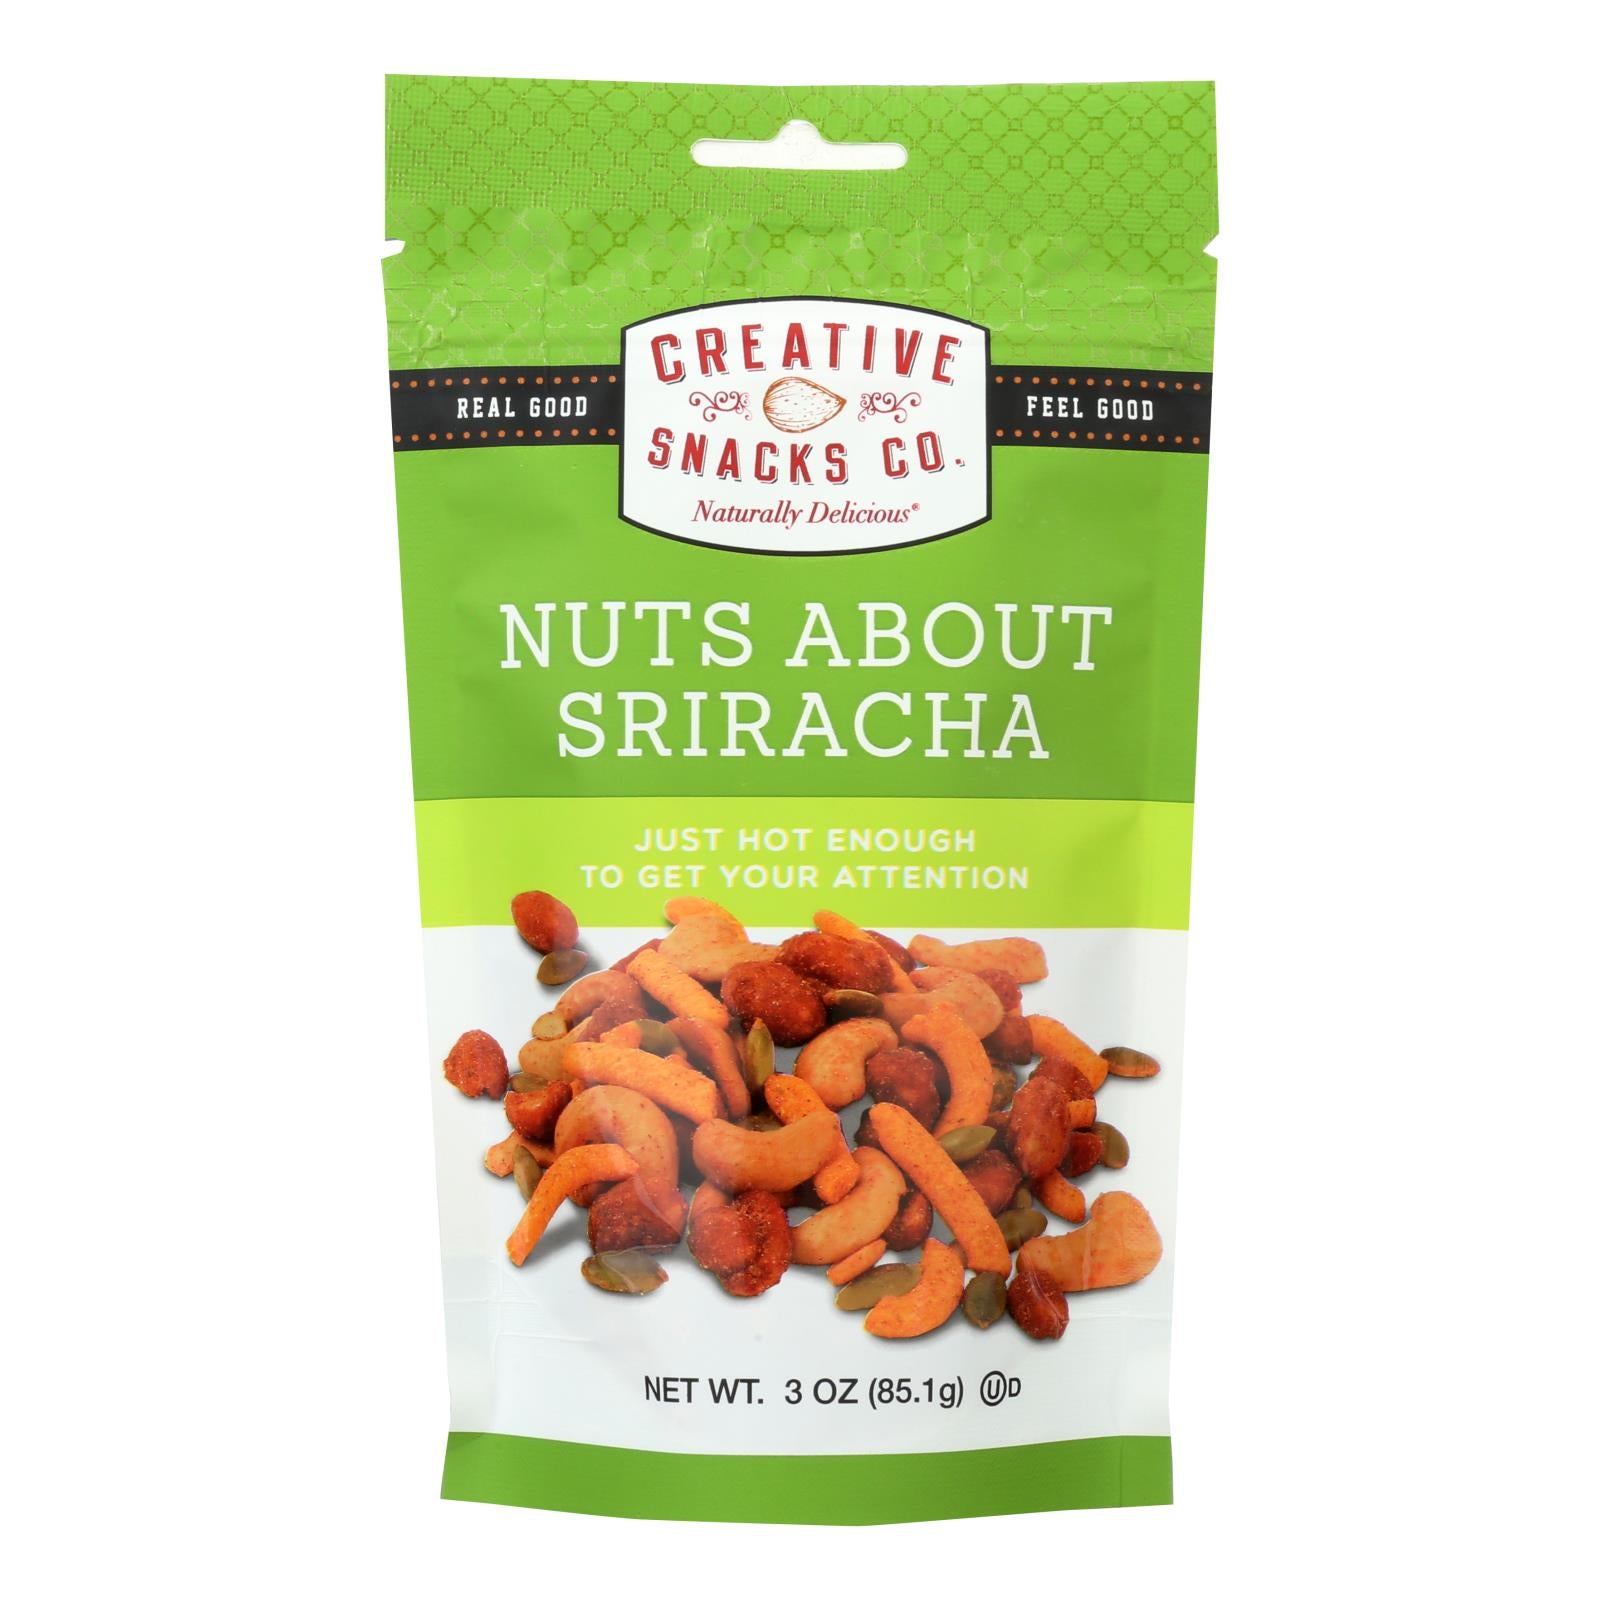 Creative Snacks Co. Nuts About Sriracha  - Case Of 6 - 3 Oz - Whole Green Foods